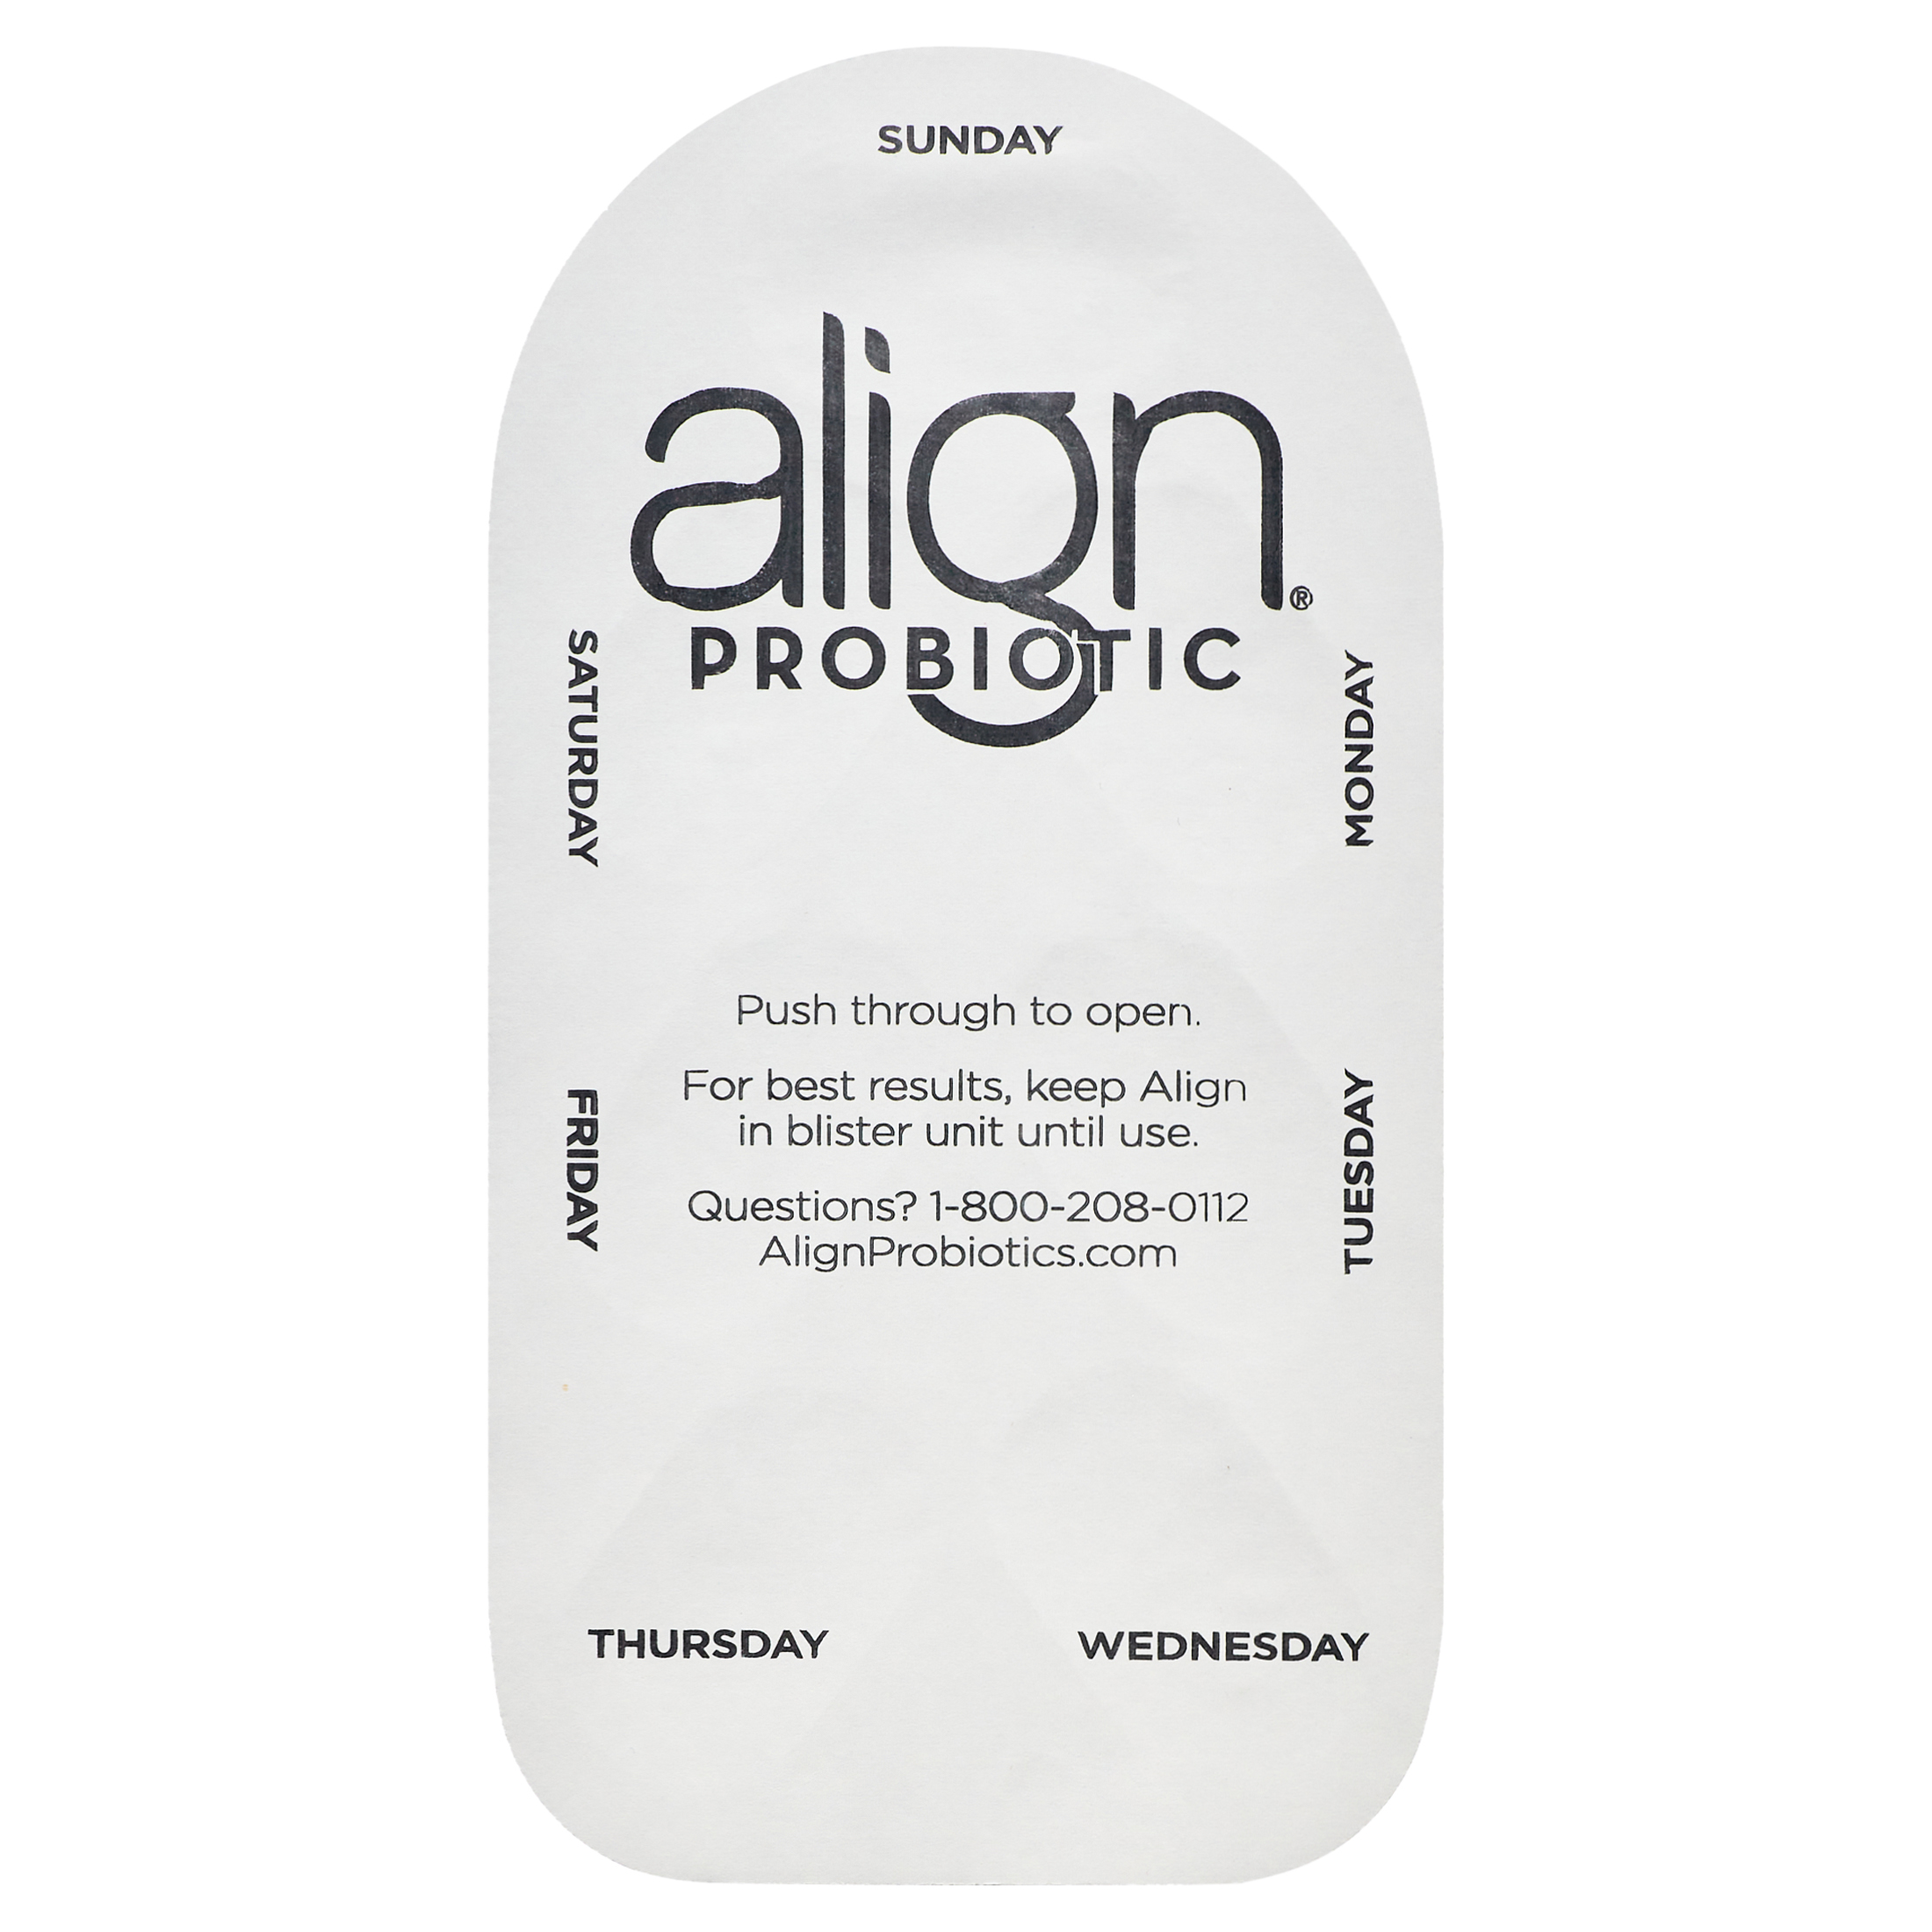 Align Probiotic Capsules, Men and Women's Daily Probiotic Supplement for Digestive Health, 42 Ct - image 4 of 7